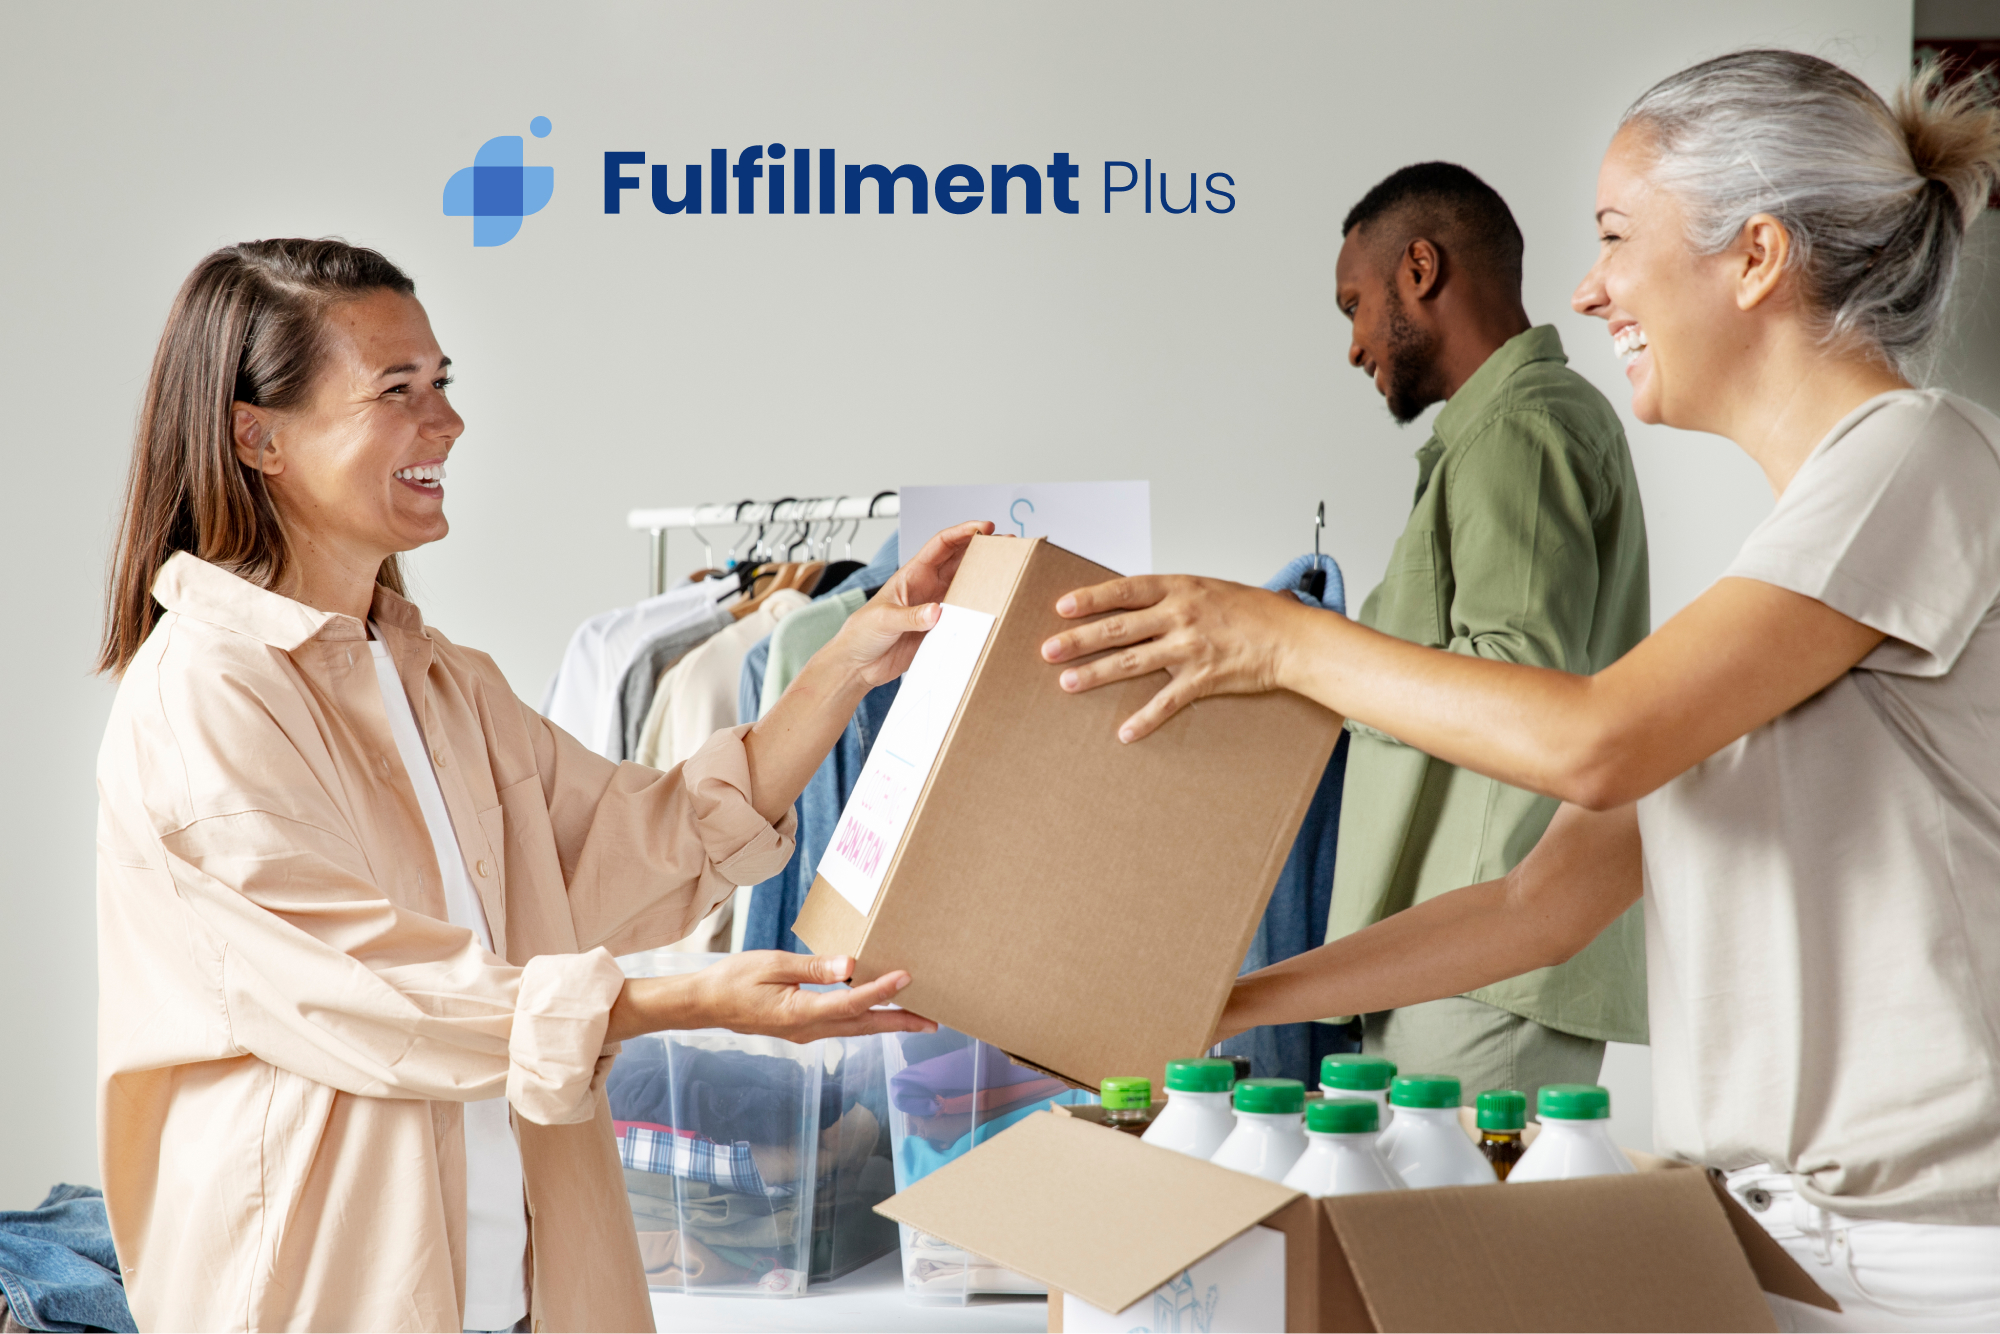 Fulfillment centers can champion social good through sustainable packaging, community engagement, and responsible labor practices.